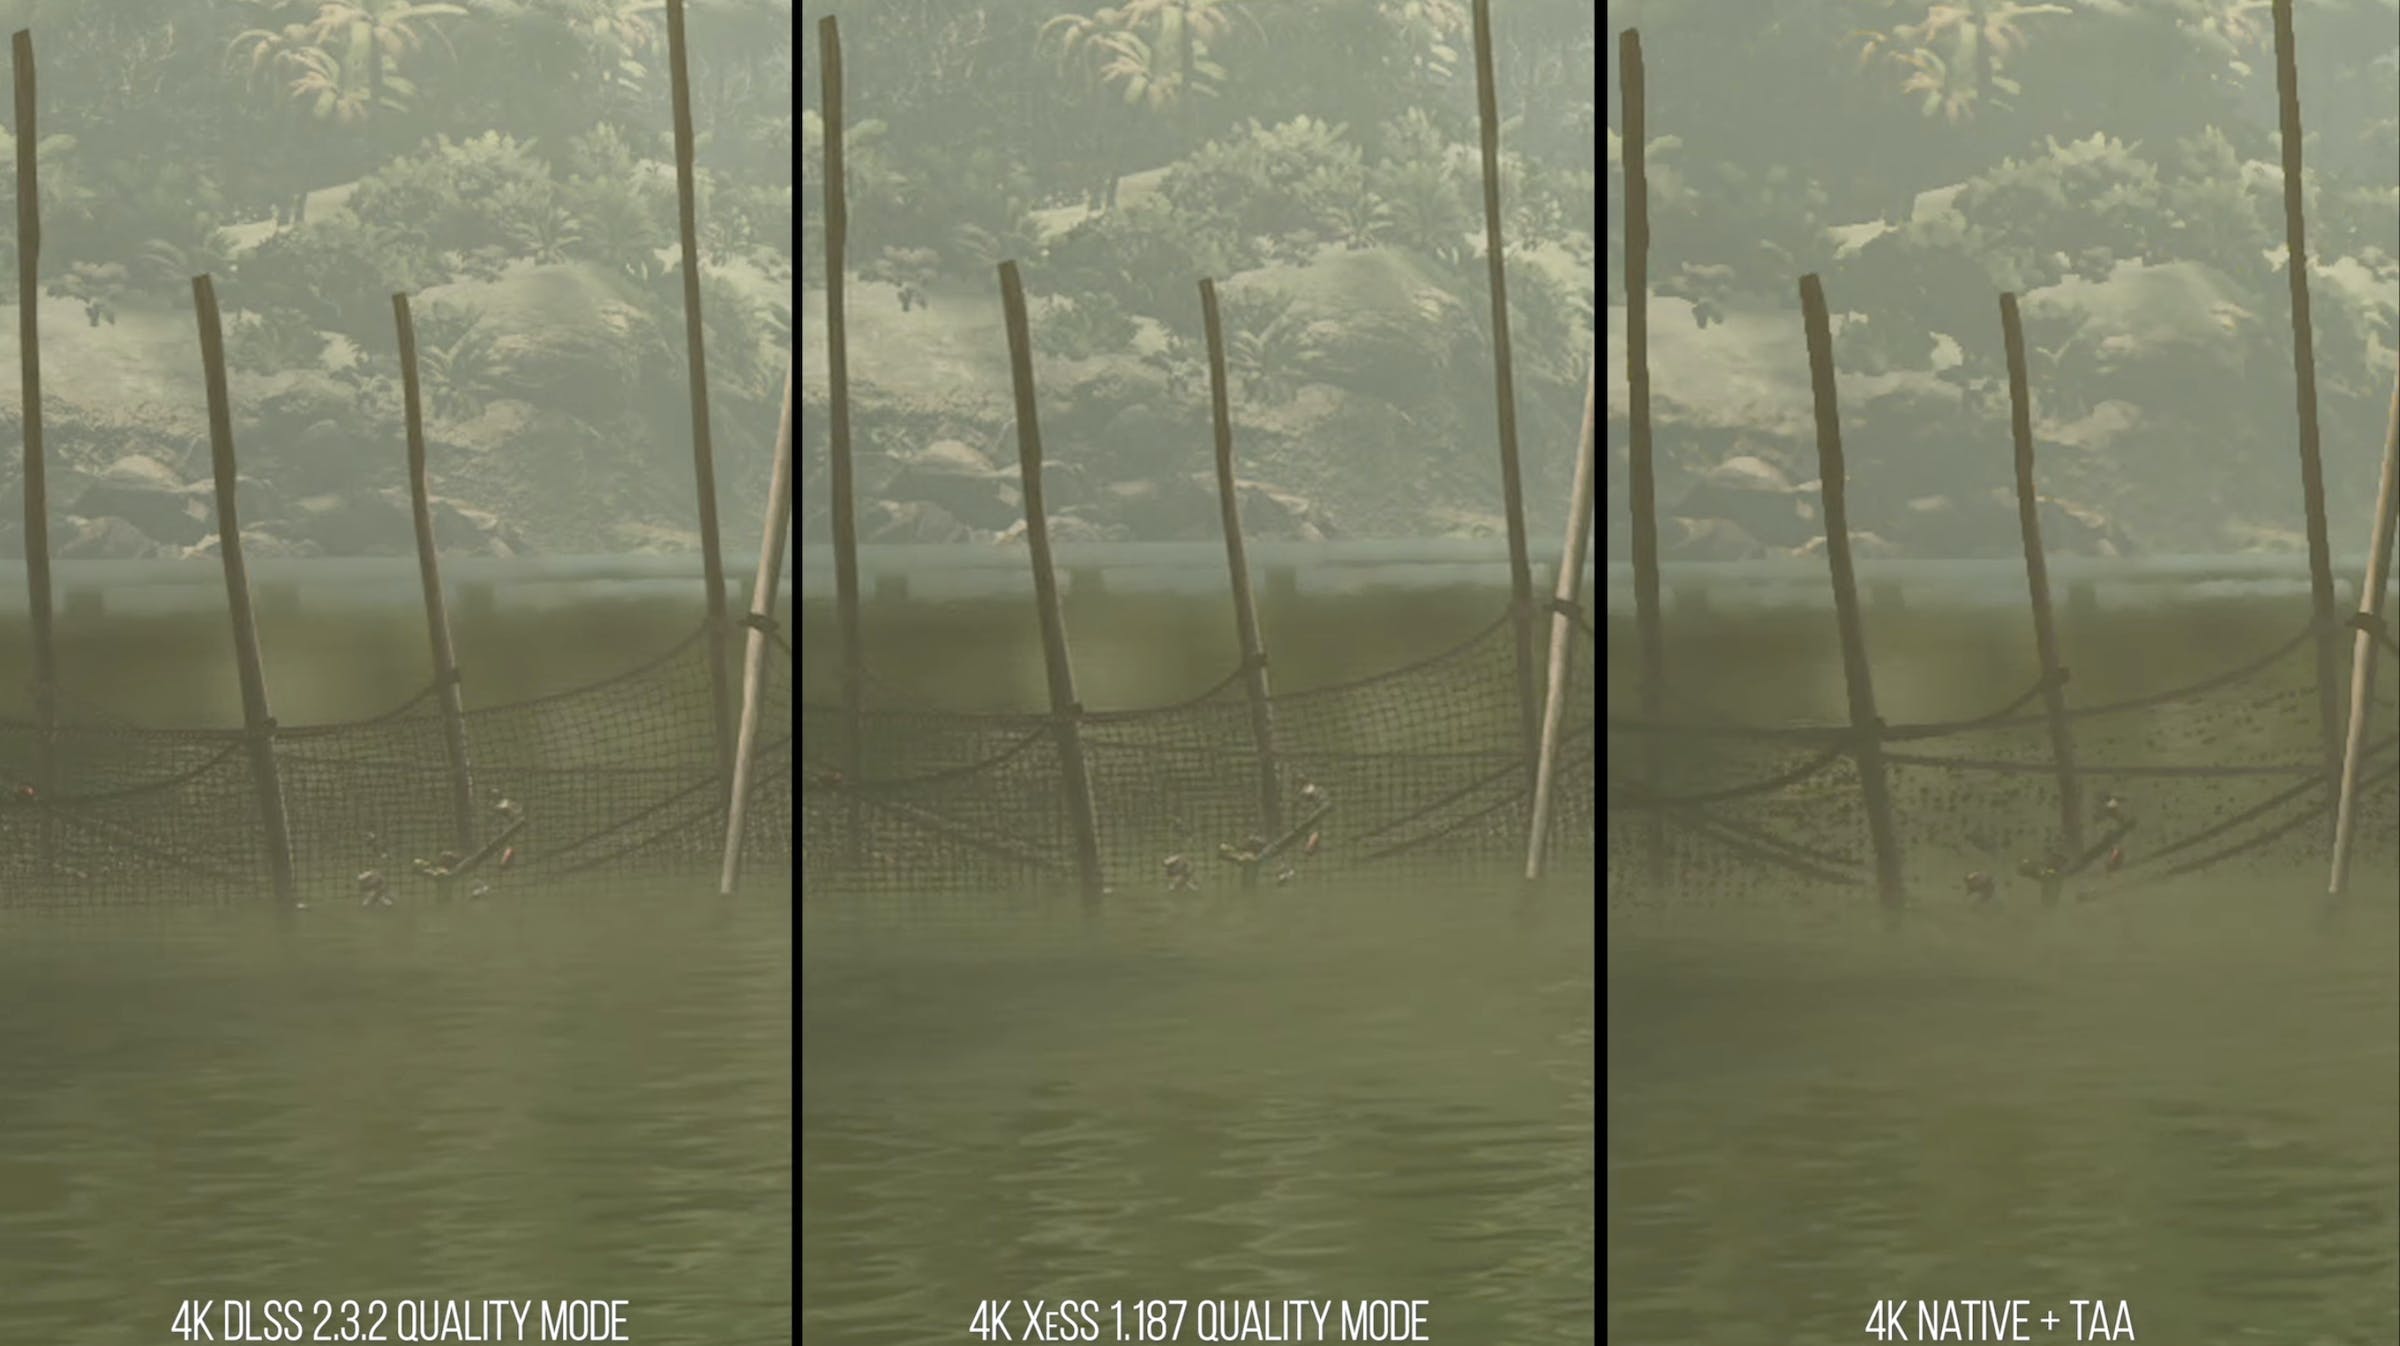 Image showing three cropped-in frames of a fishing net. The two on the left, done by Nvidia’s DLSS and Intel’s XeSS in their quality modes, show individual strands on the net. The native game on the right has parts of the net missing.